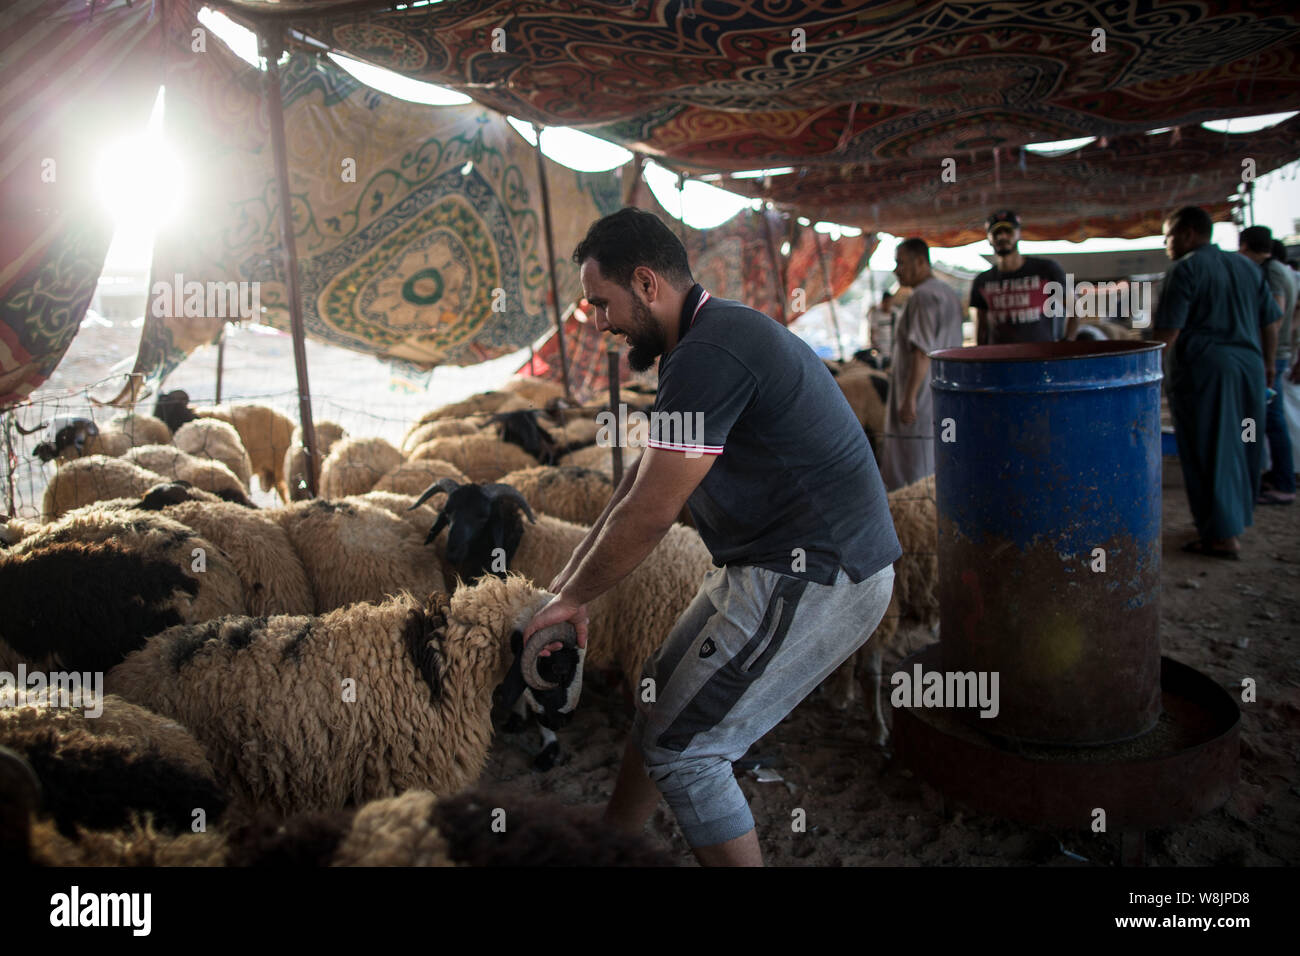 Tripoli, Libya. 9th Aug, 2019. A man drags a sheep at a livestock market in Tripoli, Libya, on Aug. 9, 2019. Libya's National Animal Health Center on Friday said that 350,000 sheep have been imported for Eid al-Adha, or the 'Festival of the Sacrifice.' Credit: Amru Salahuddien/Xinhua Stock Photo